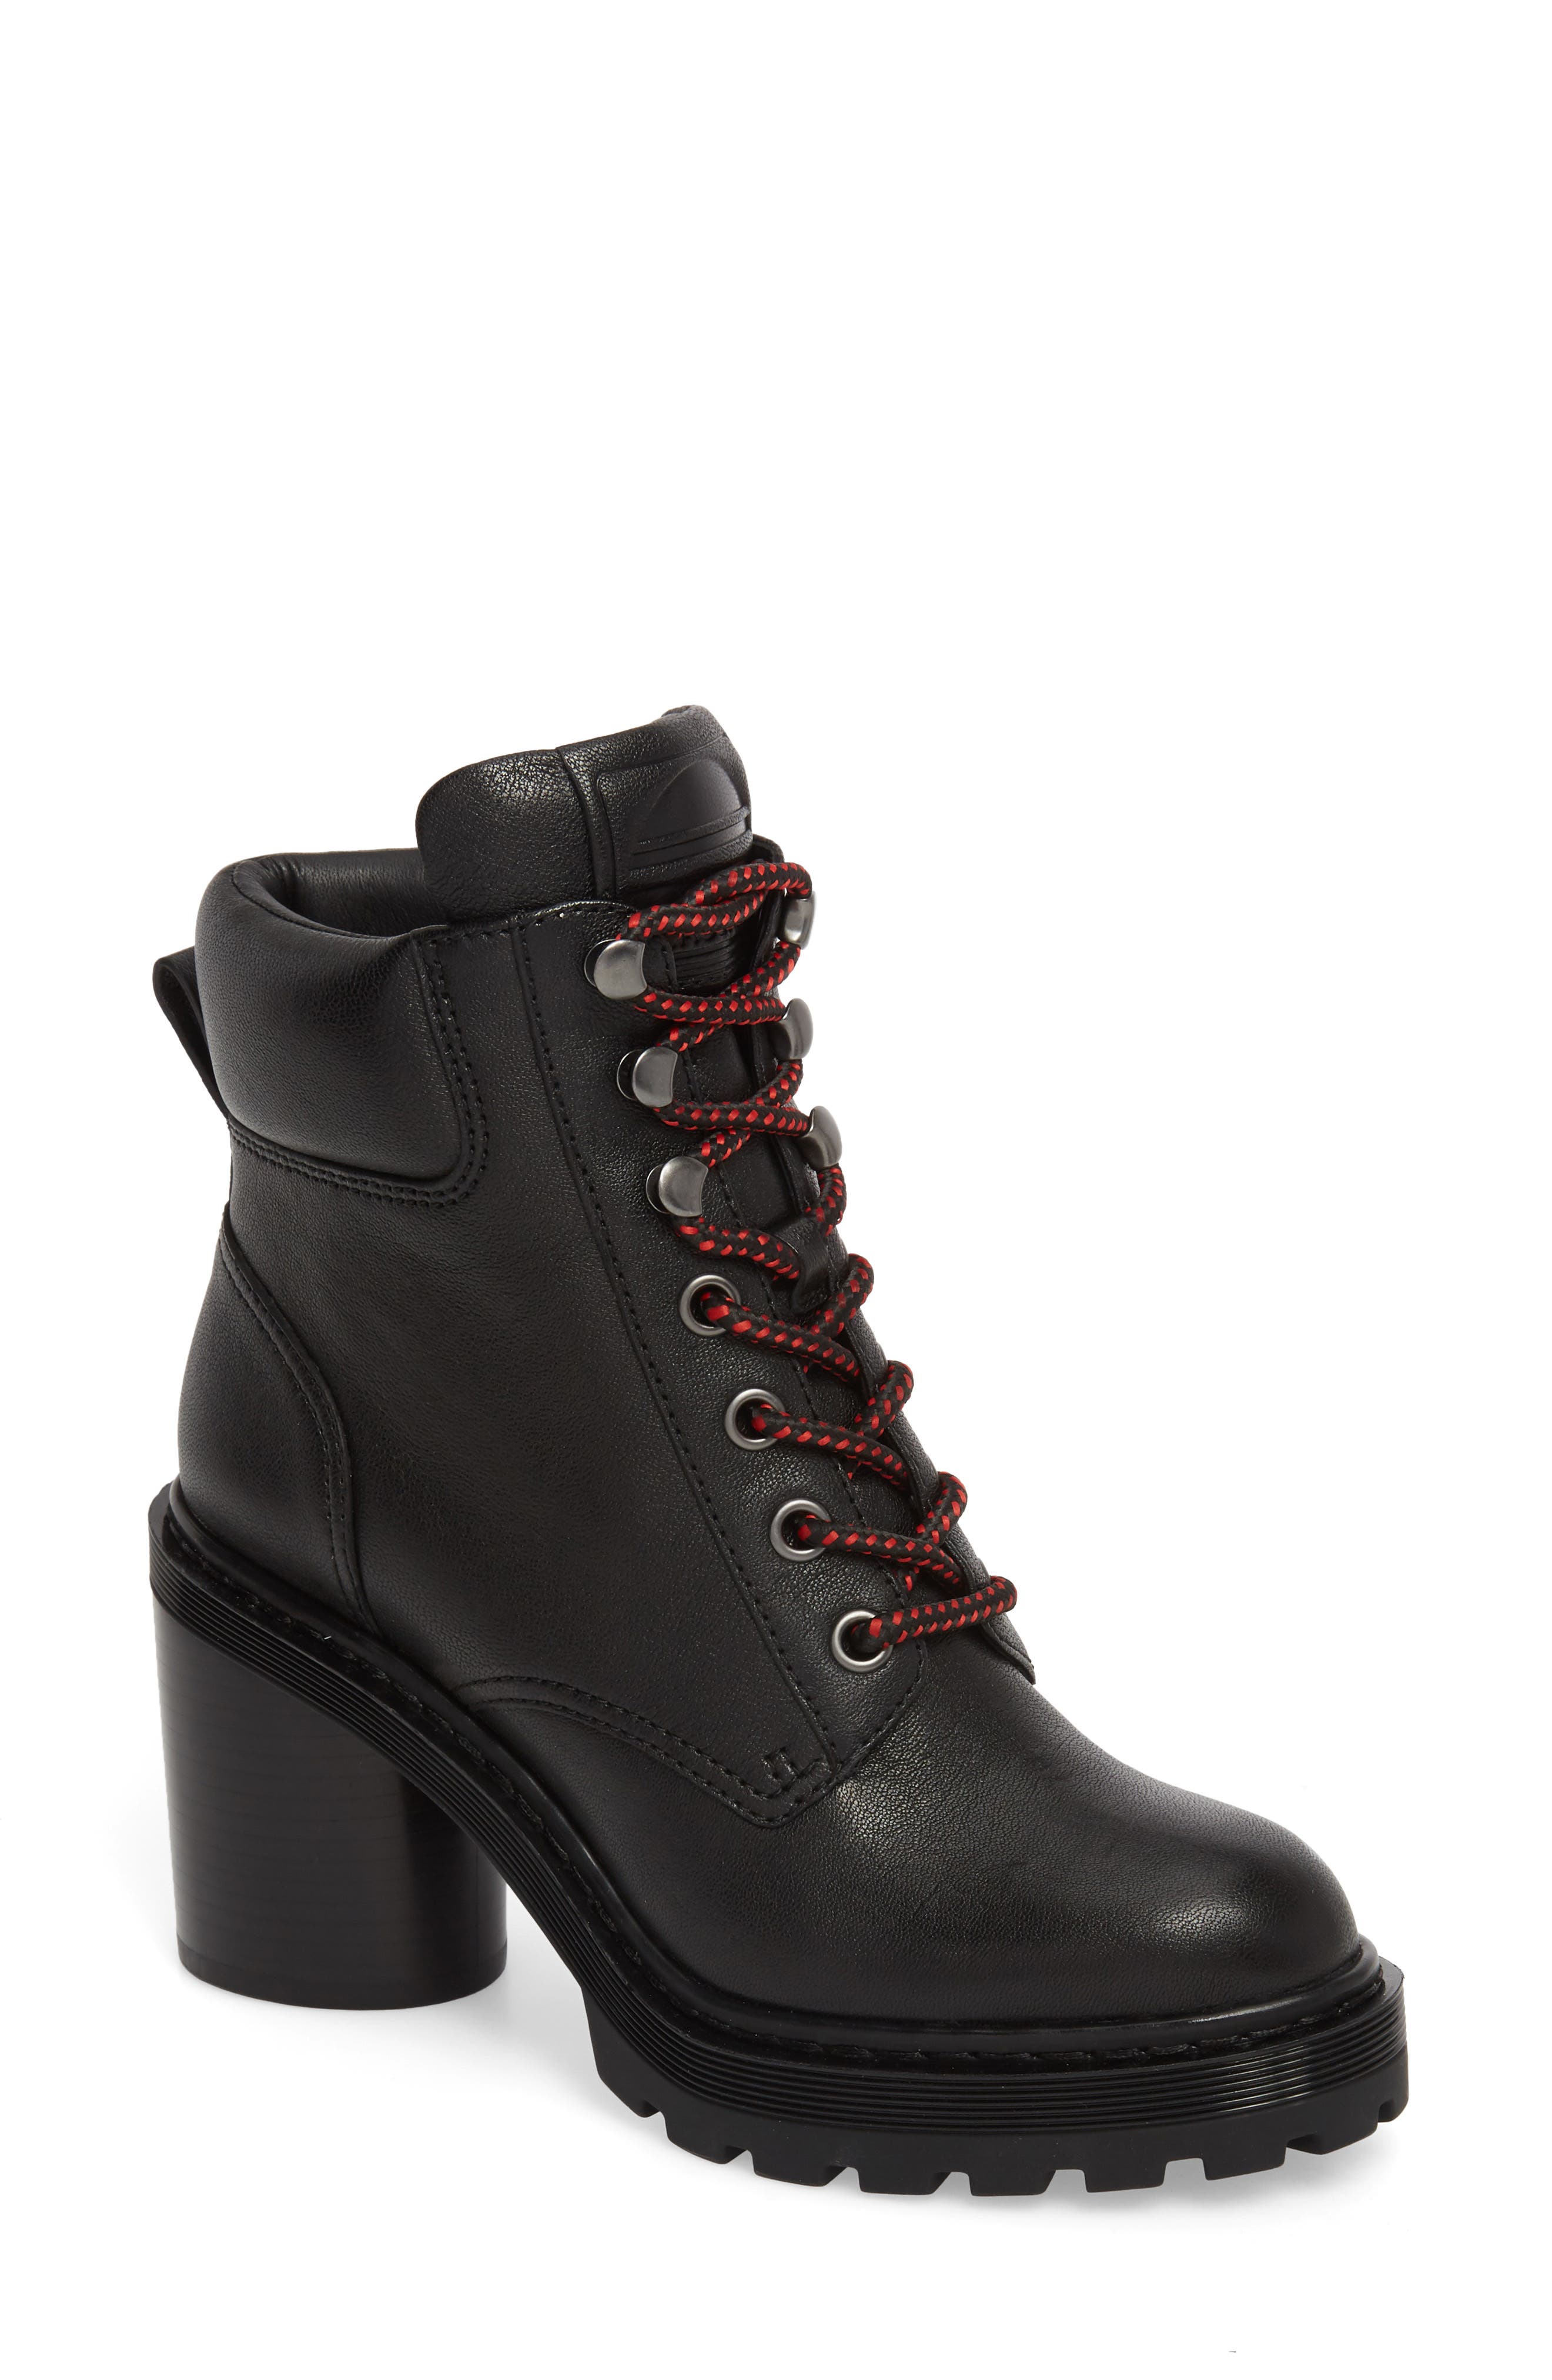 marc jacobs crosby boots